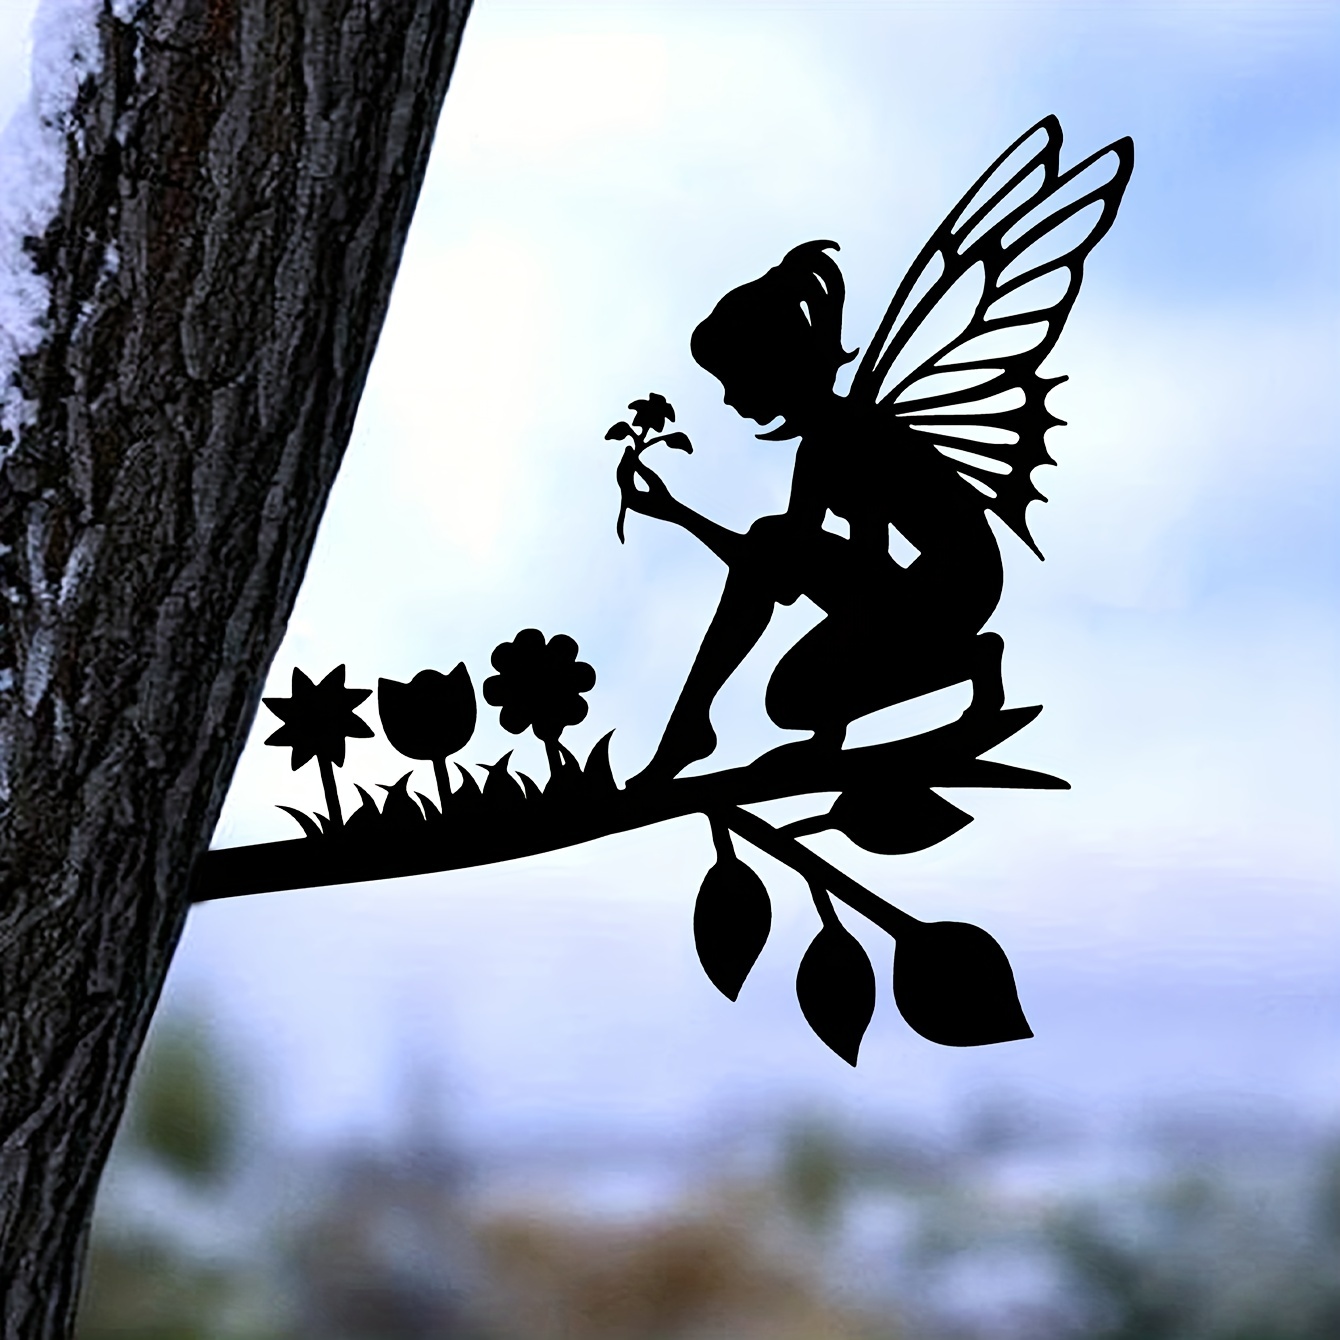 1pc Picking Flowers Fairy On Branch Steel Silhouette Metal Wall Art Home  Garden Yard Patio Outdoor Statue Stake Decoration Perfect For Birthdays,  Hous